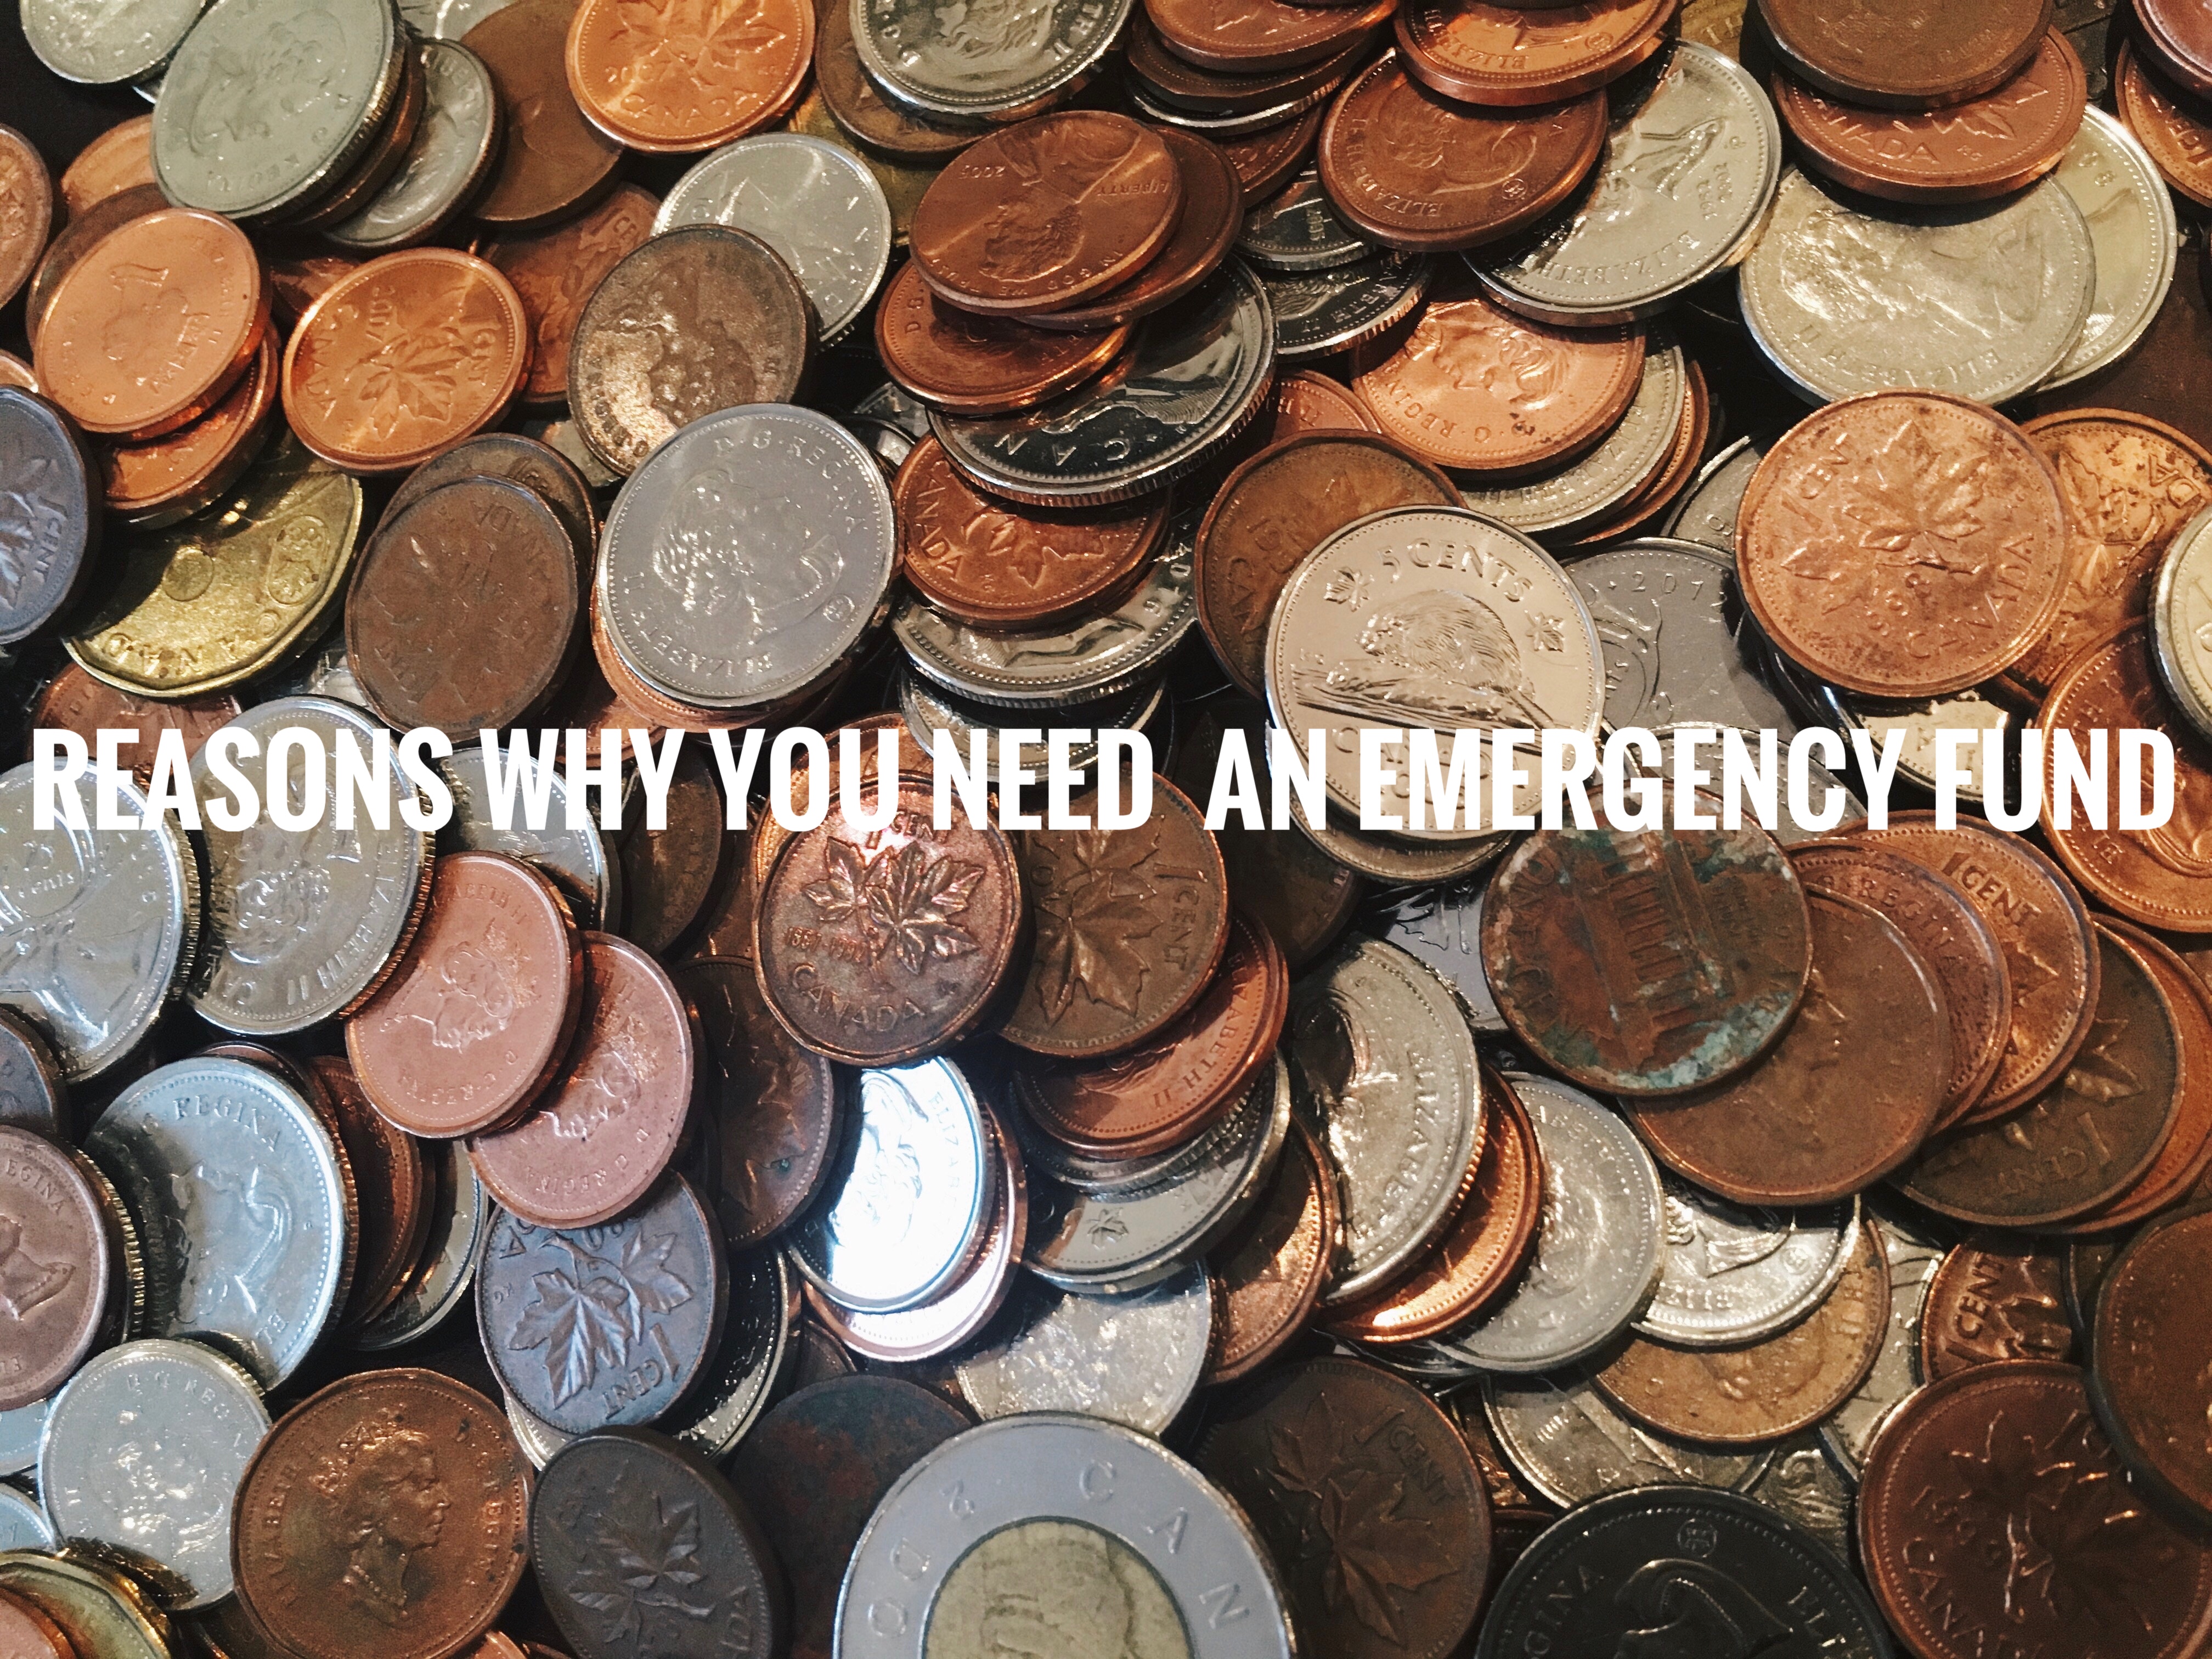 Emergency Fund: canadian coins